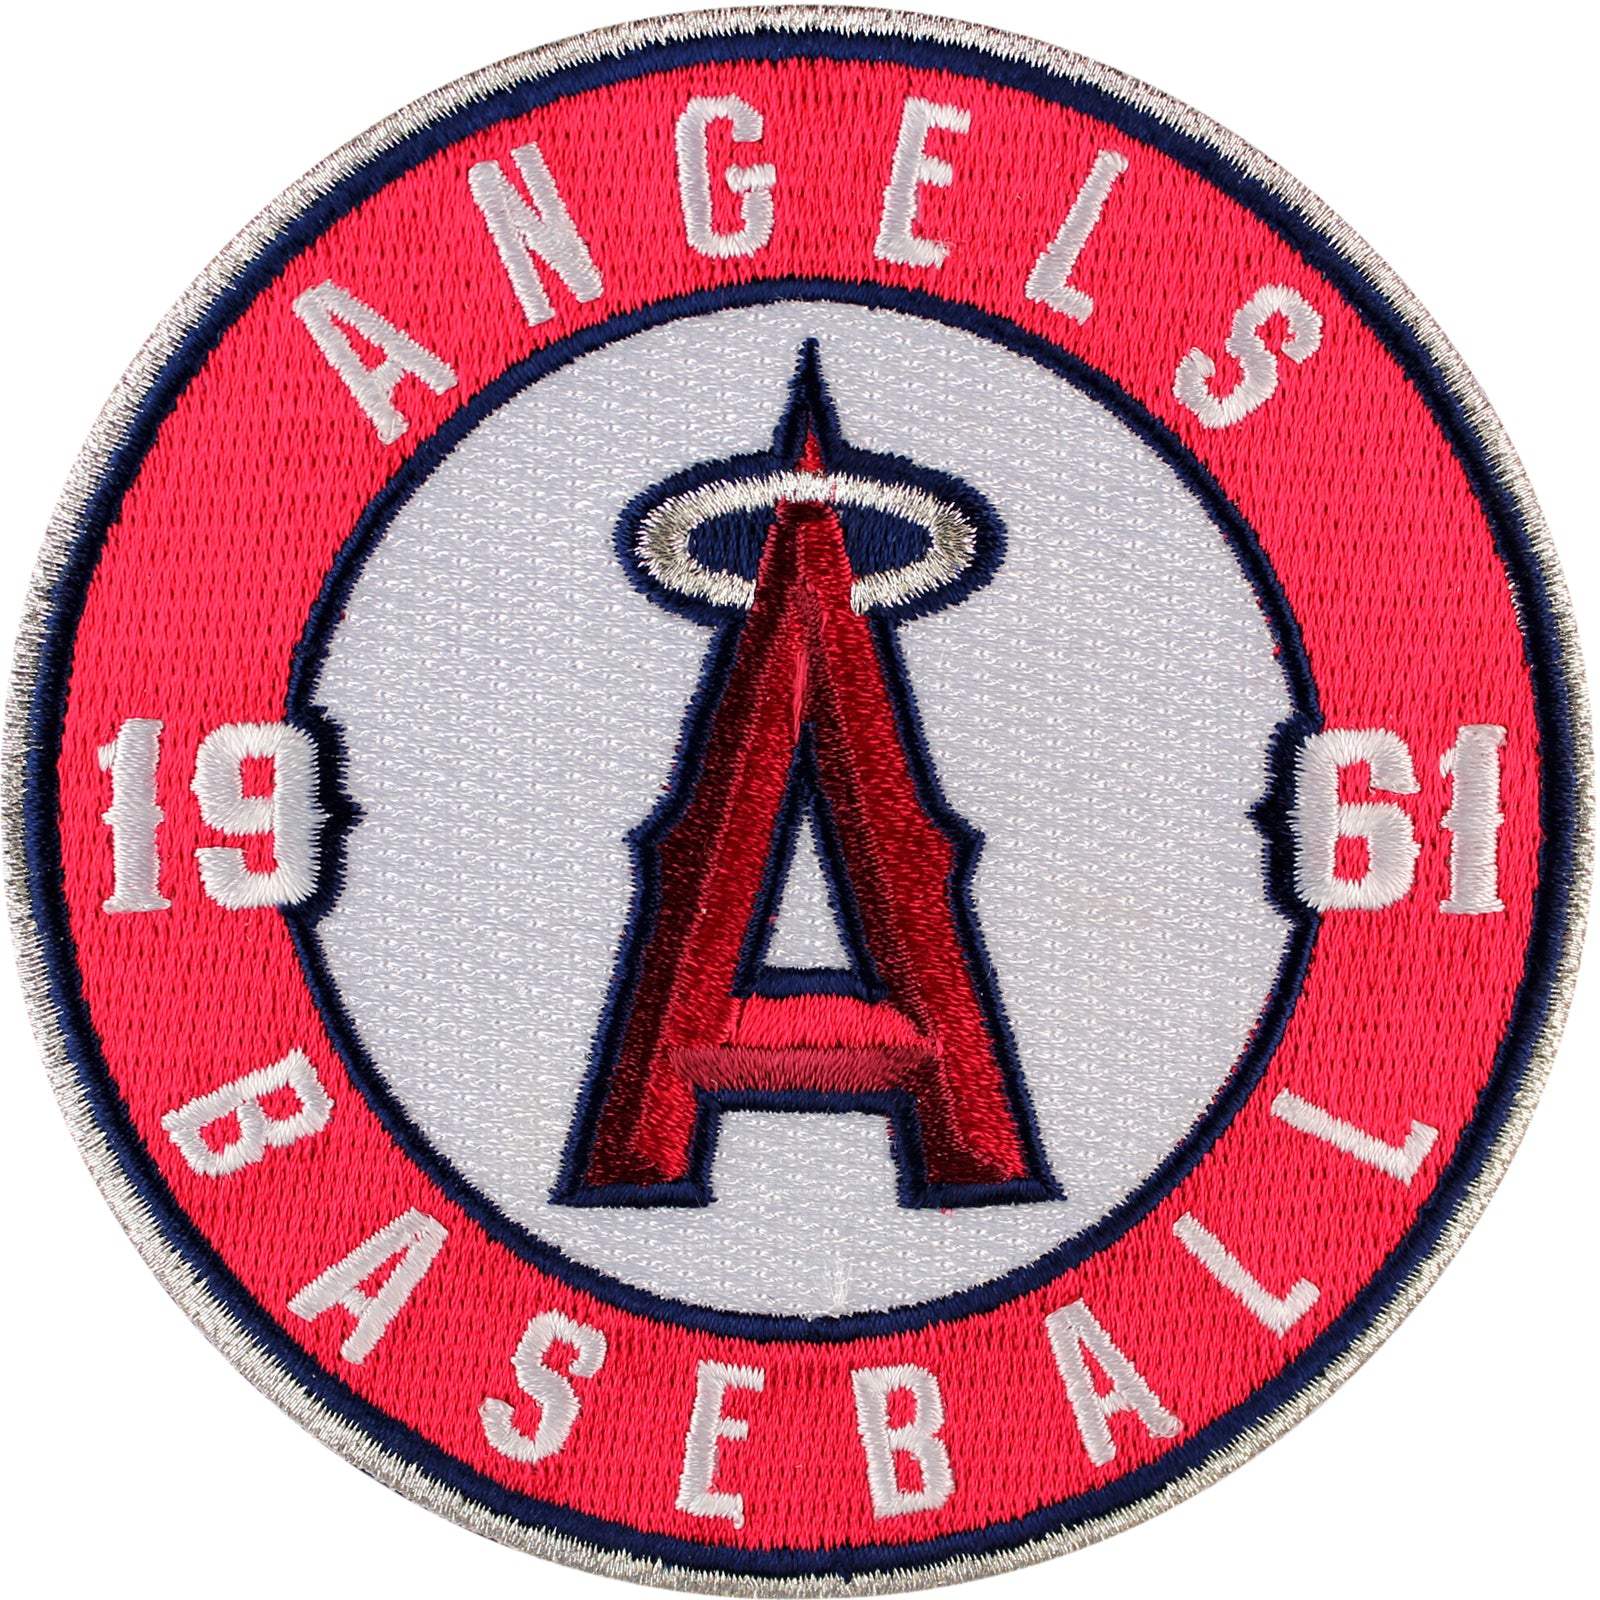 Los Angeles Angels Logos and Caps Through the Years: 1961-2020 